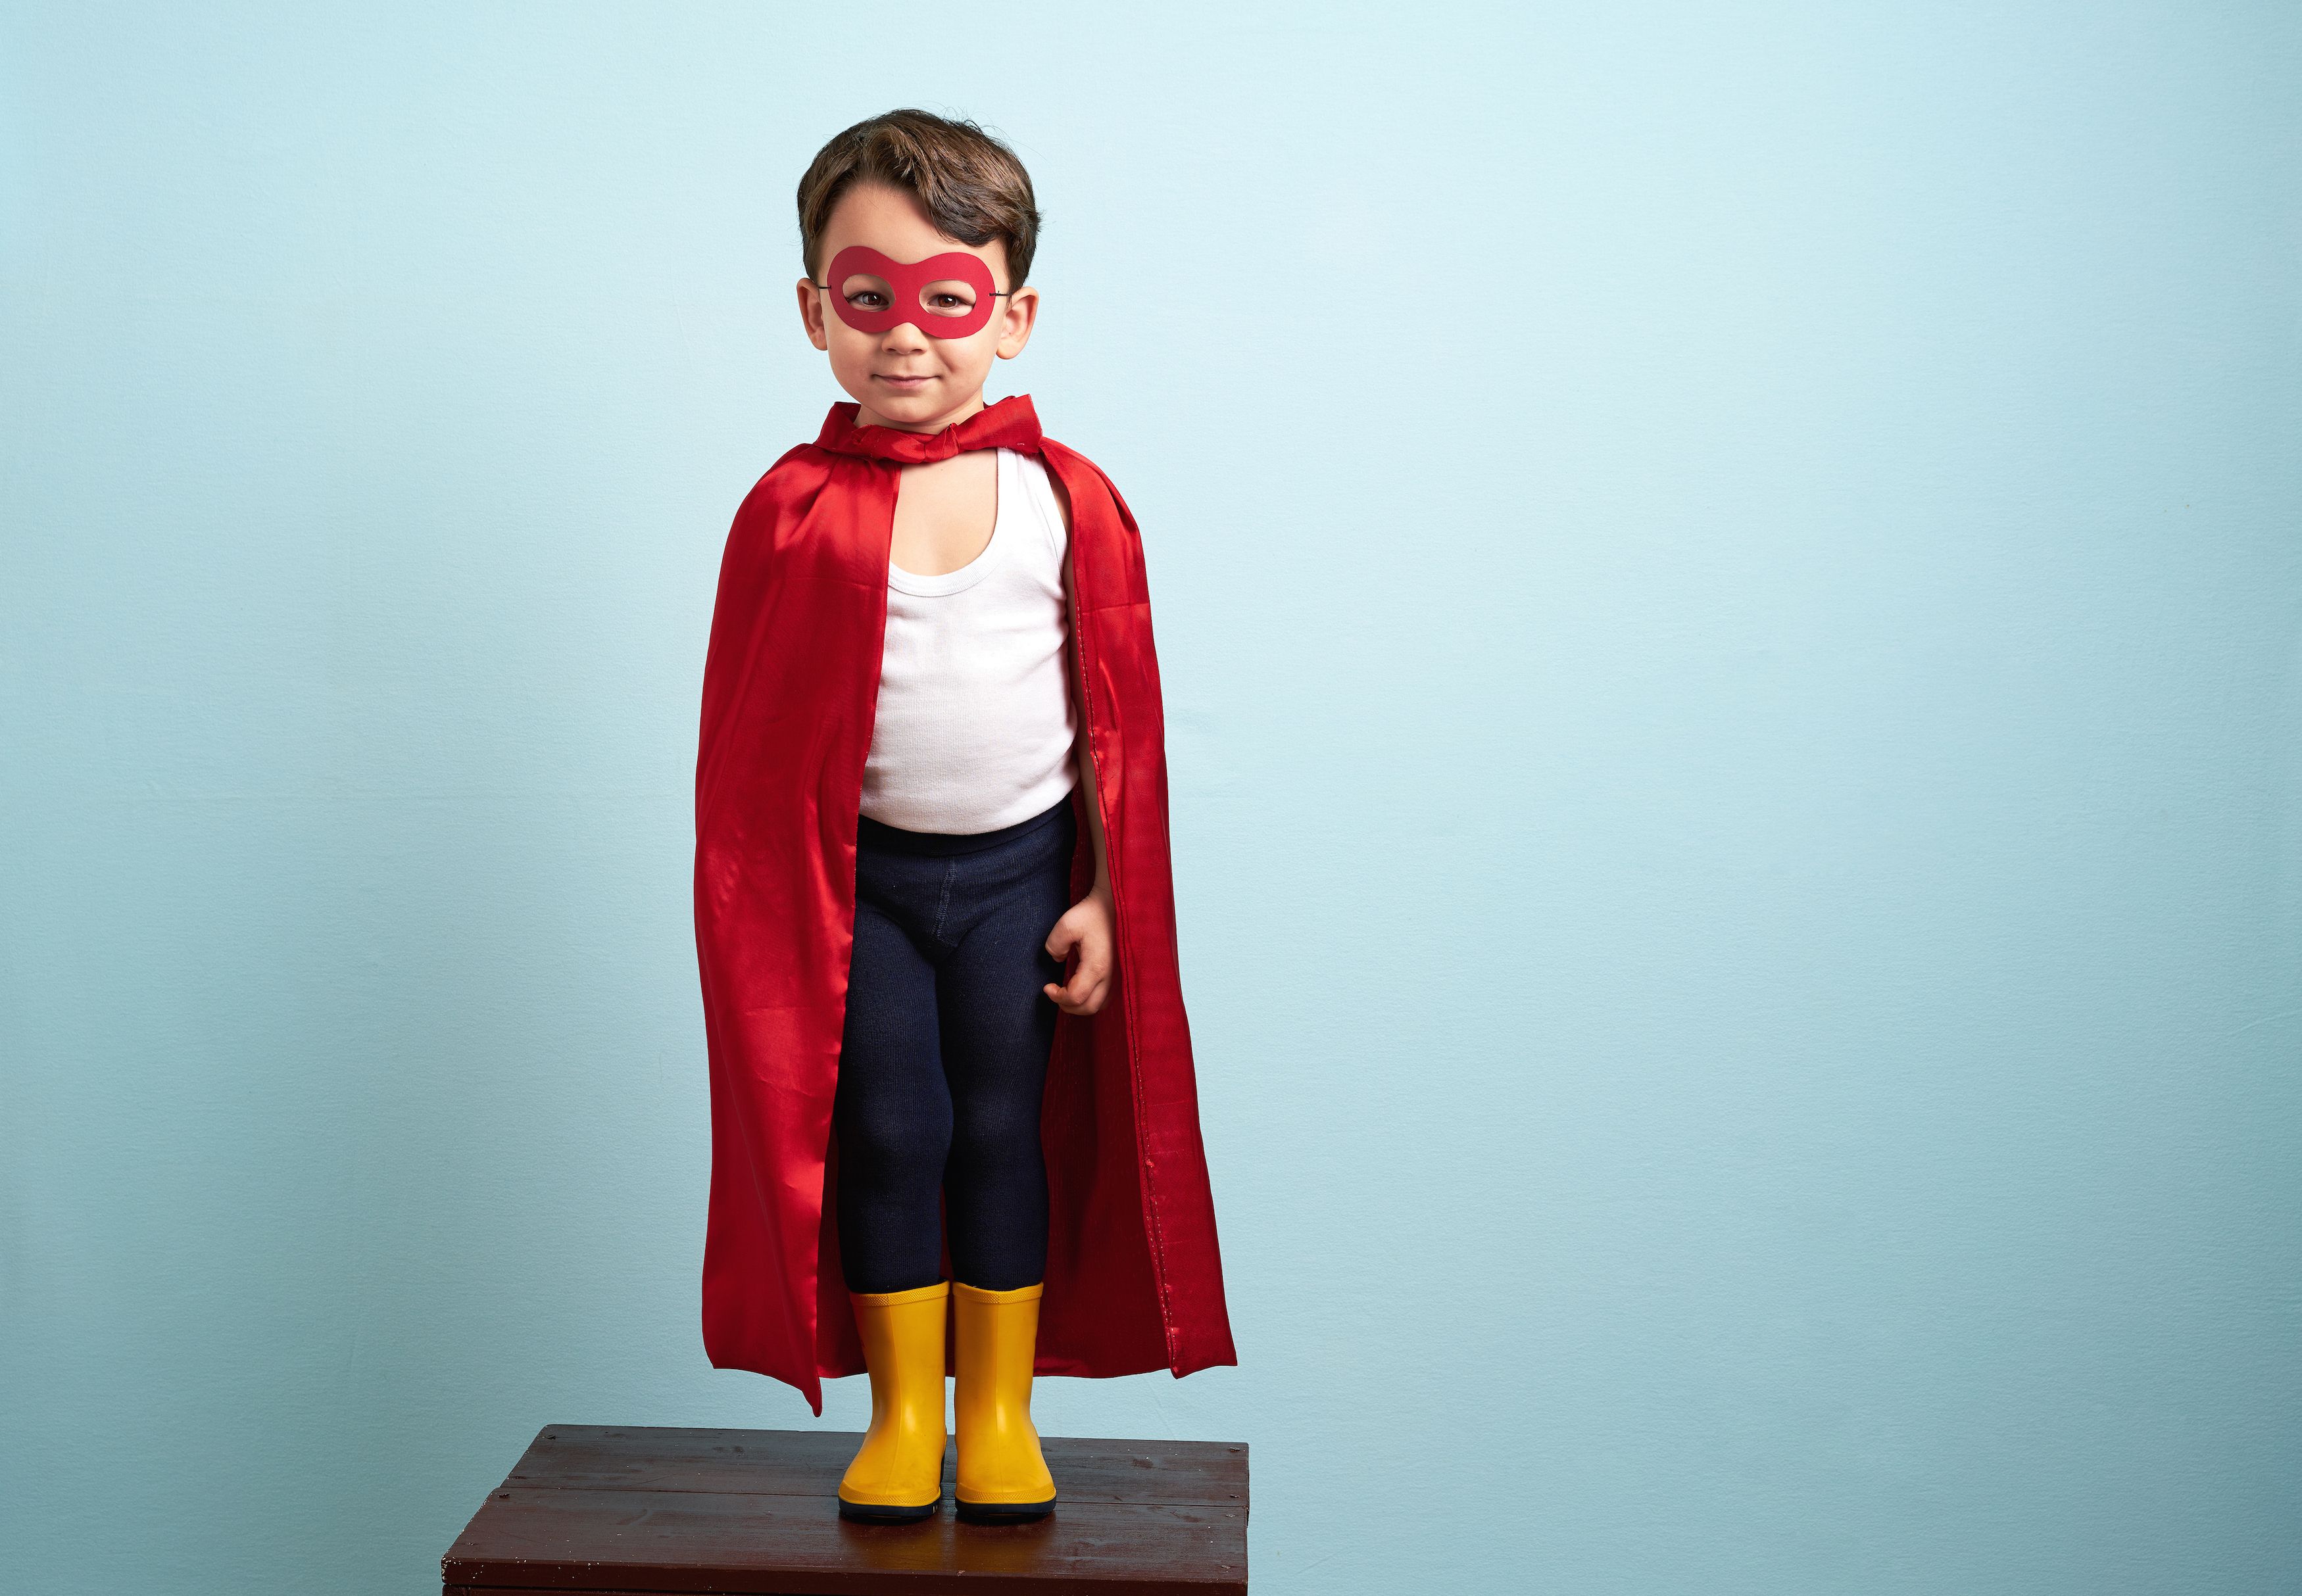 Superhero Culture Linked to Aggression in Kids - Effect of Violent Media on  Preschoolers